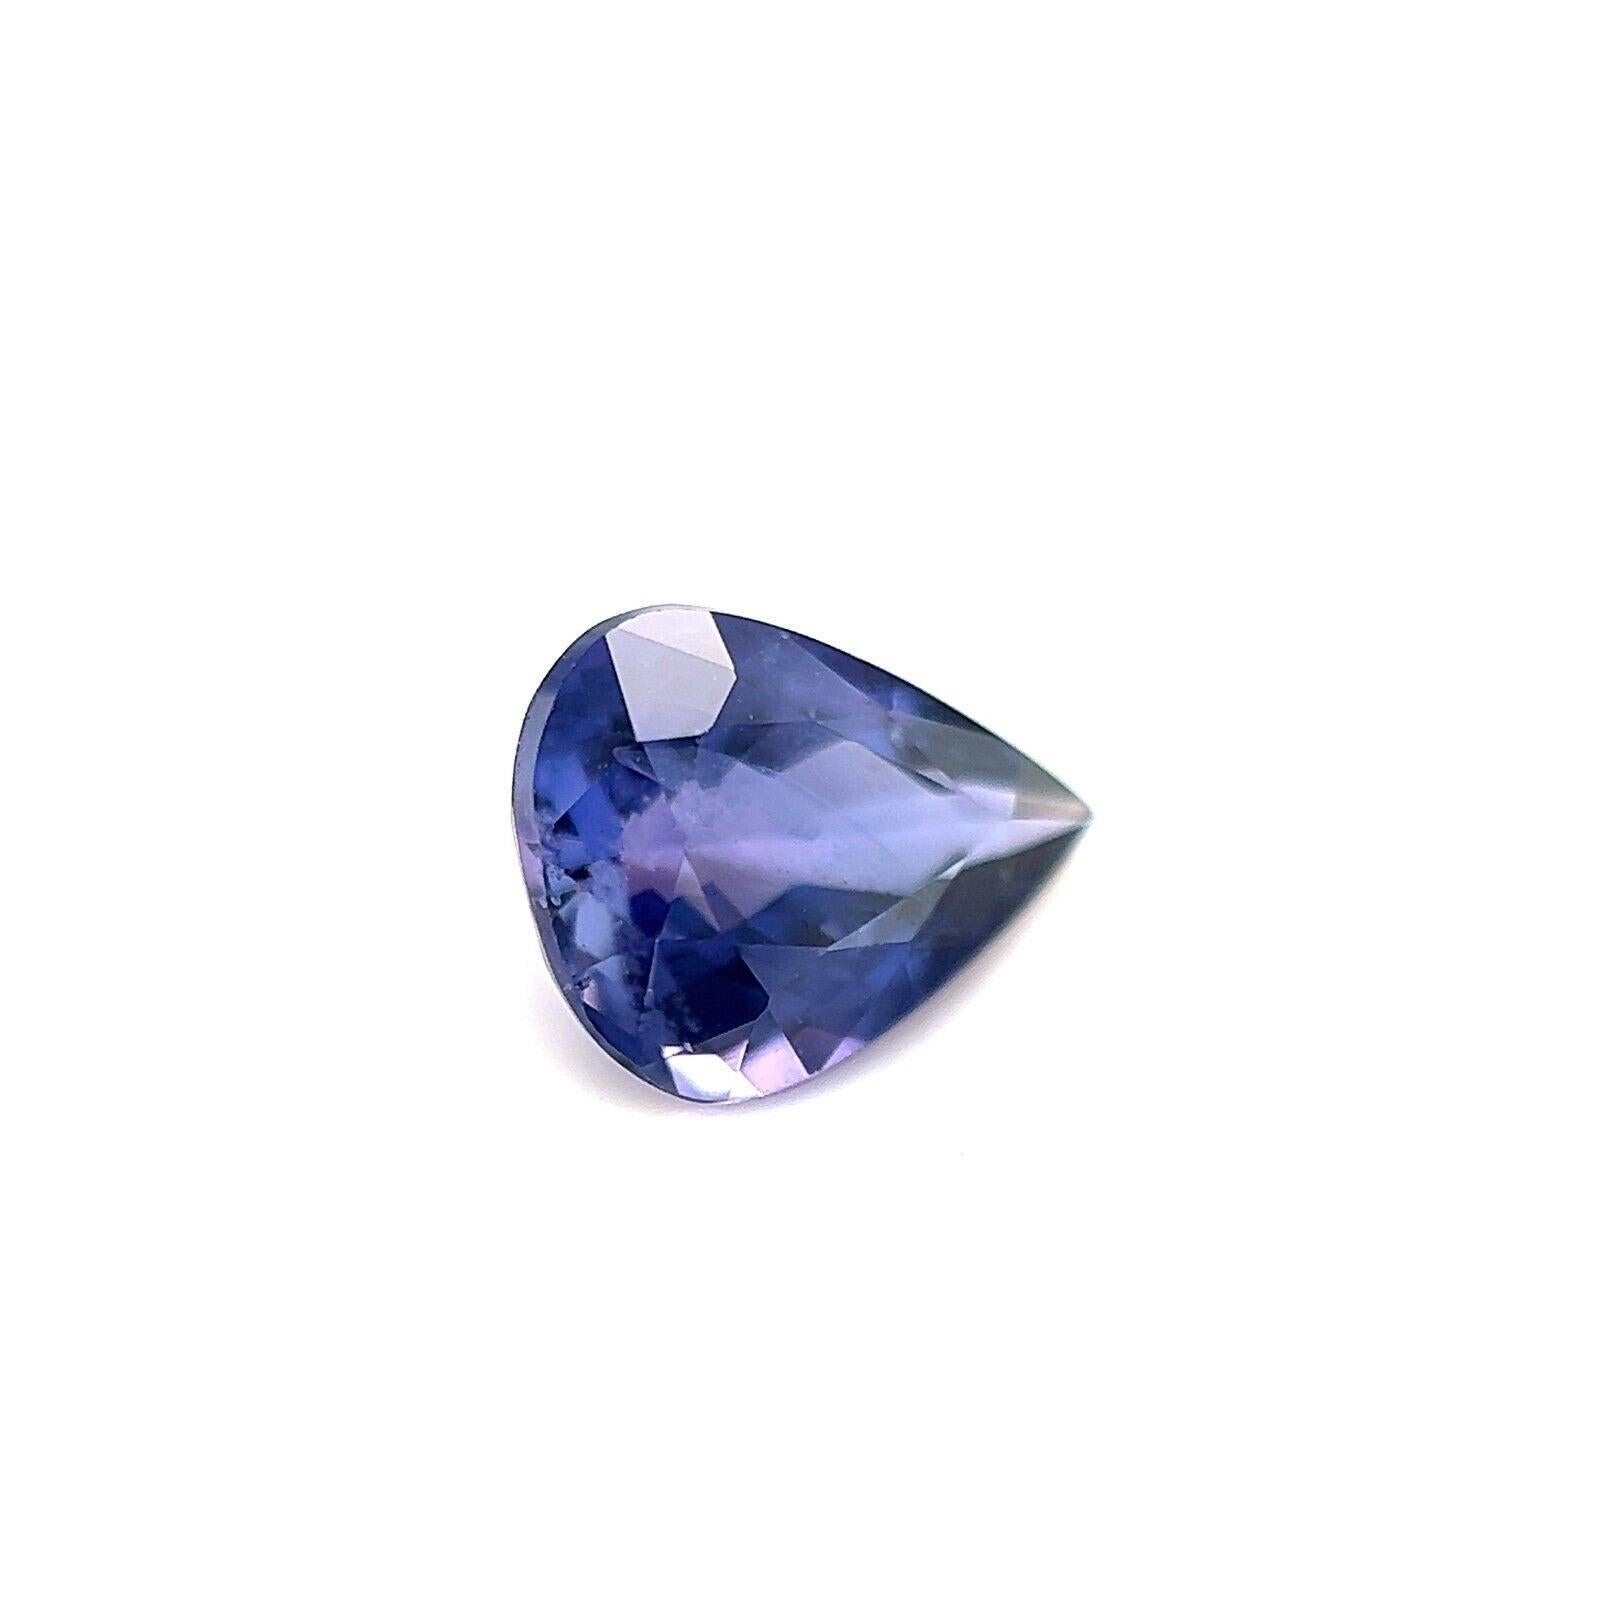 0.84ct Vivid Blue Purple Sapphire Pear Teardrop Cut Rare Loose Cut Gem 6.7x5.2mm

Natural Vivid Blue Purple Sapphire Gemstone.
0.84 Carat with a beautiful vivid bluish purple colour and good clarity, some small natural inclusions visible when